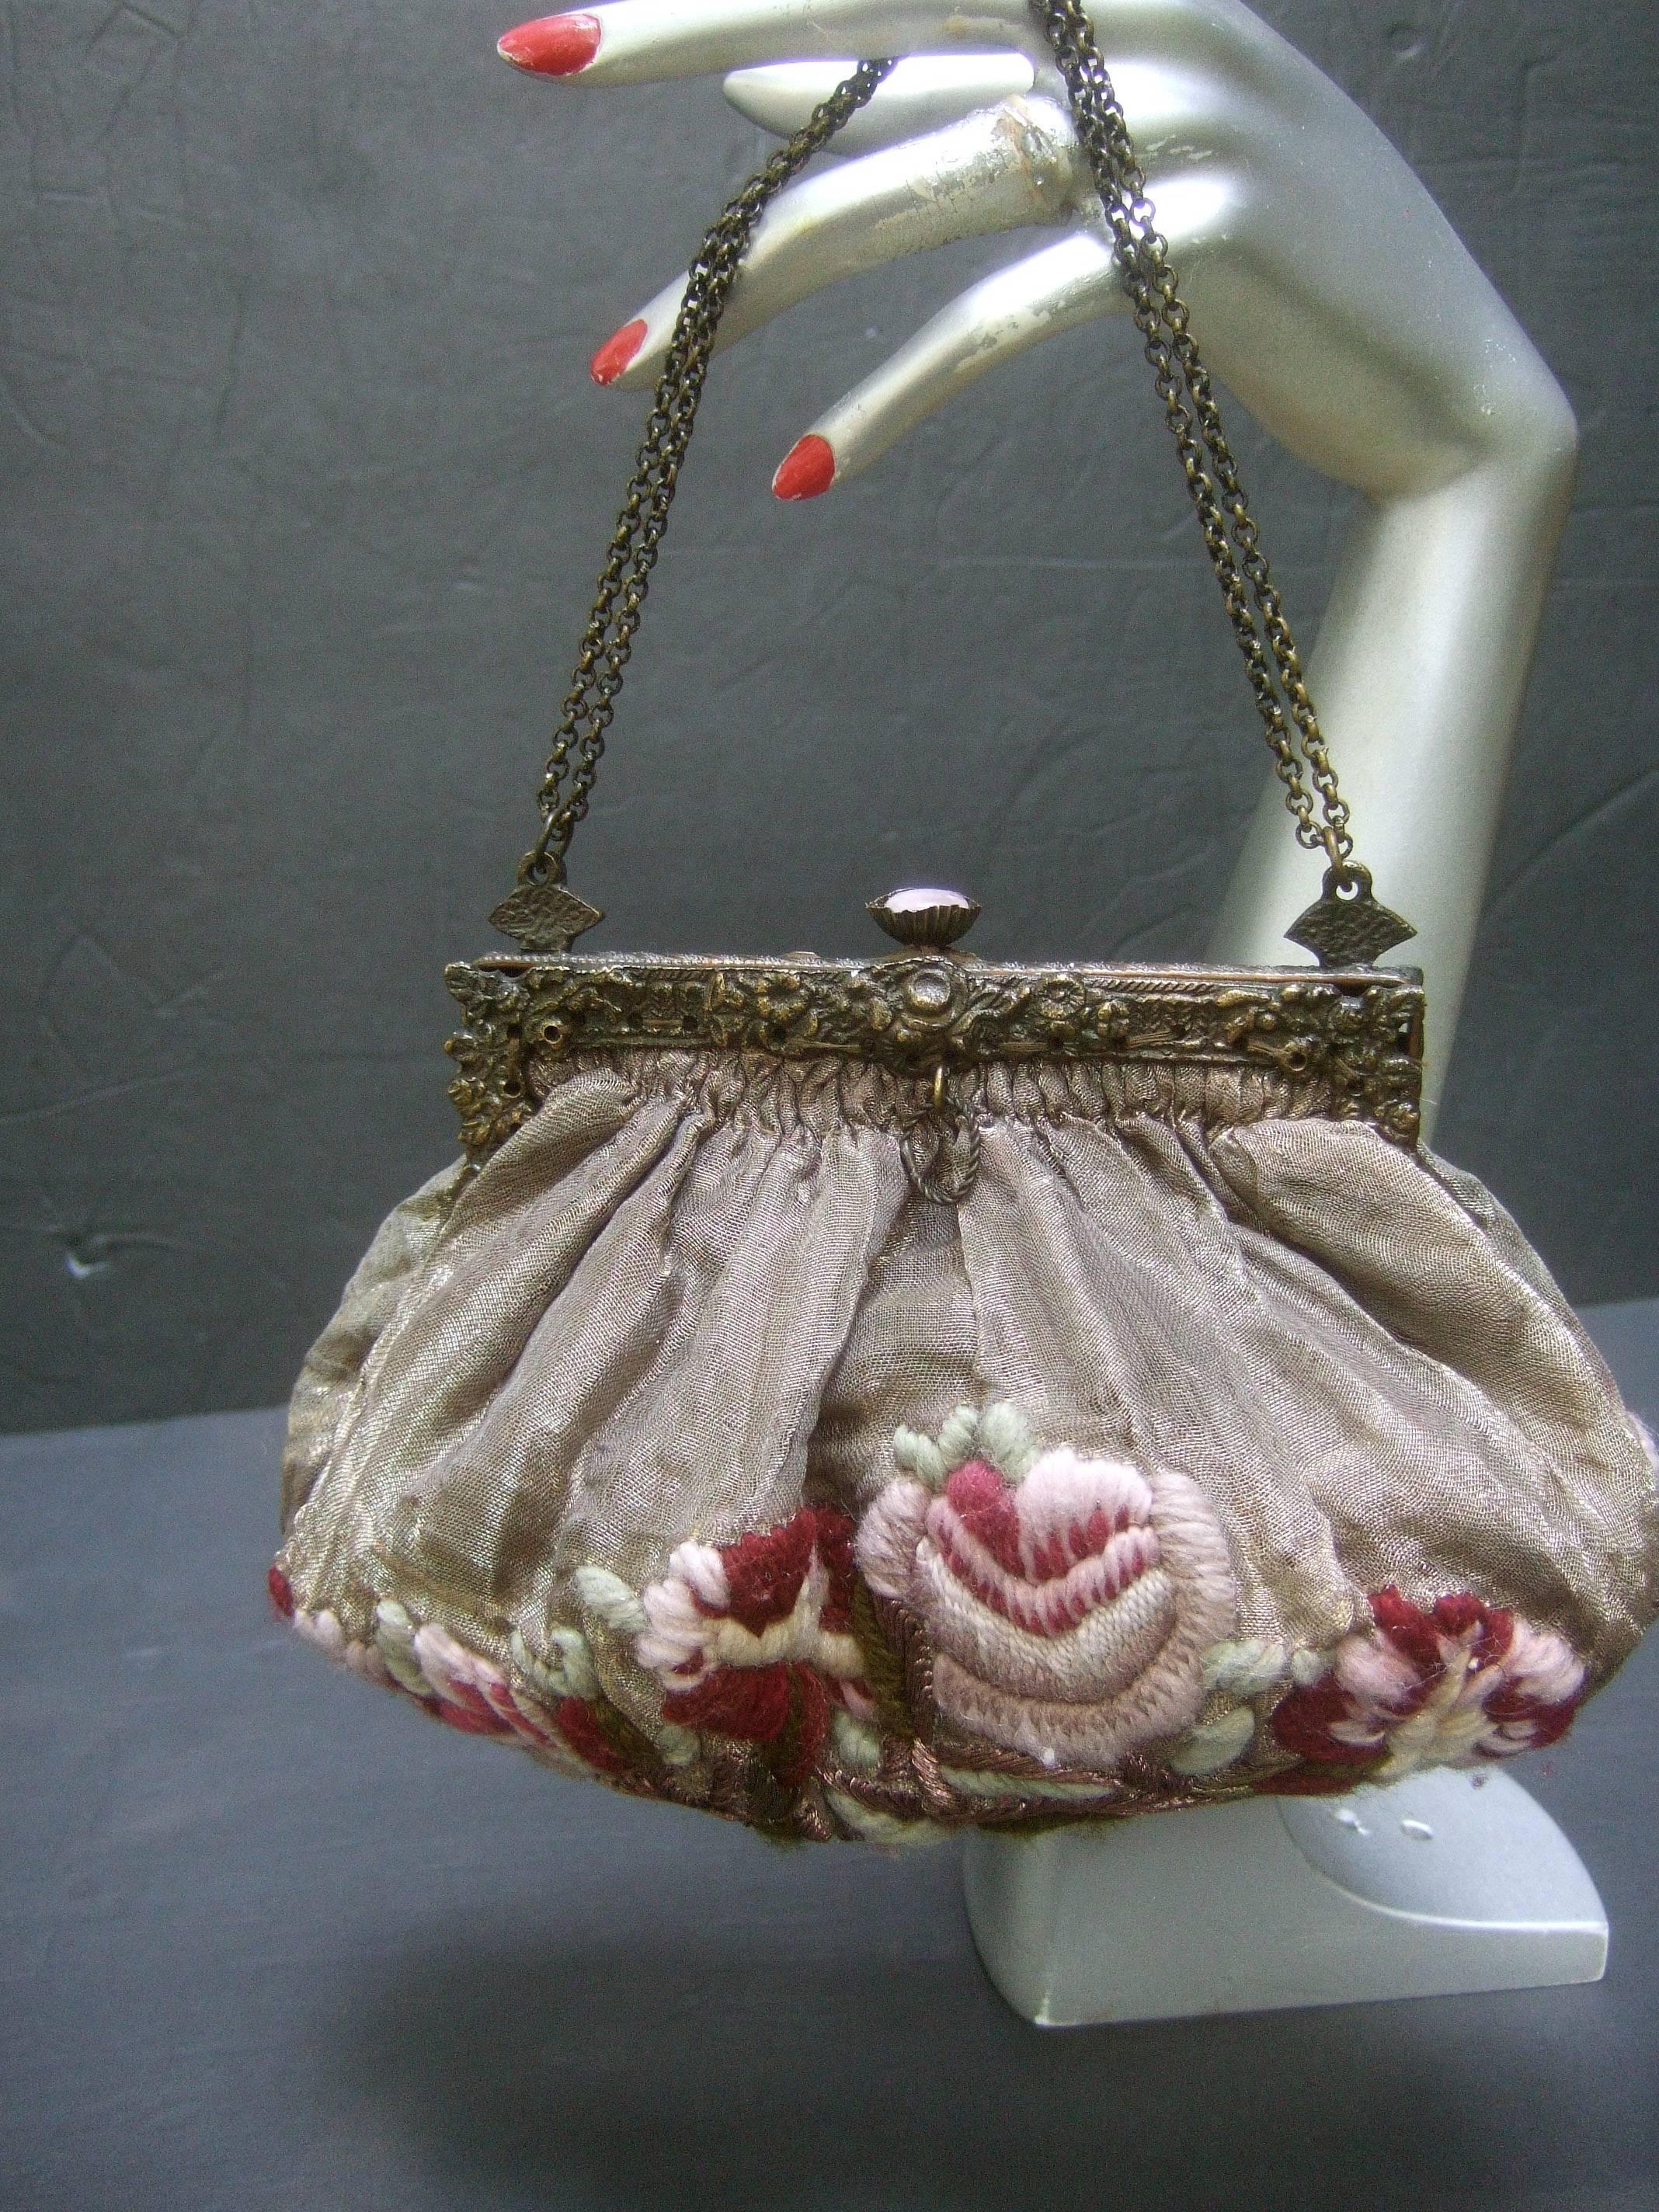 Exquisite art nouveau victorian evening bag c 1920s
The antique evening bag is covered with bronze
metallic organza embellished with mauve & magenta 
embroidered flowers on both sides 

The ornate brass metal clasp frame has an aged 
darkened